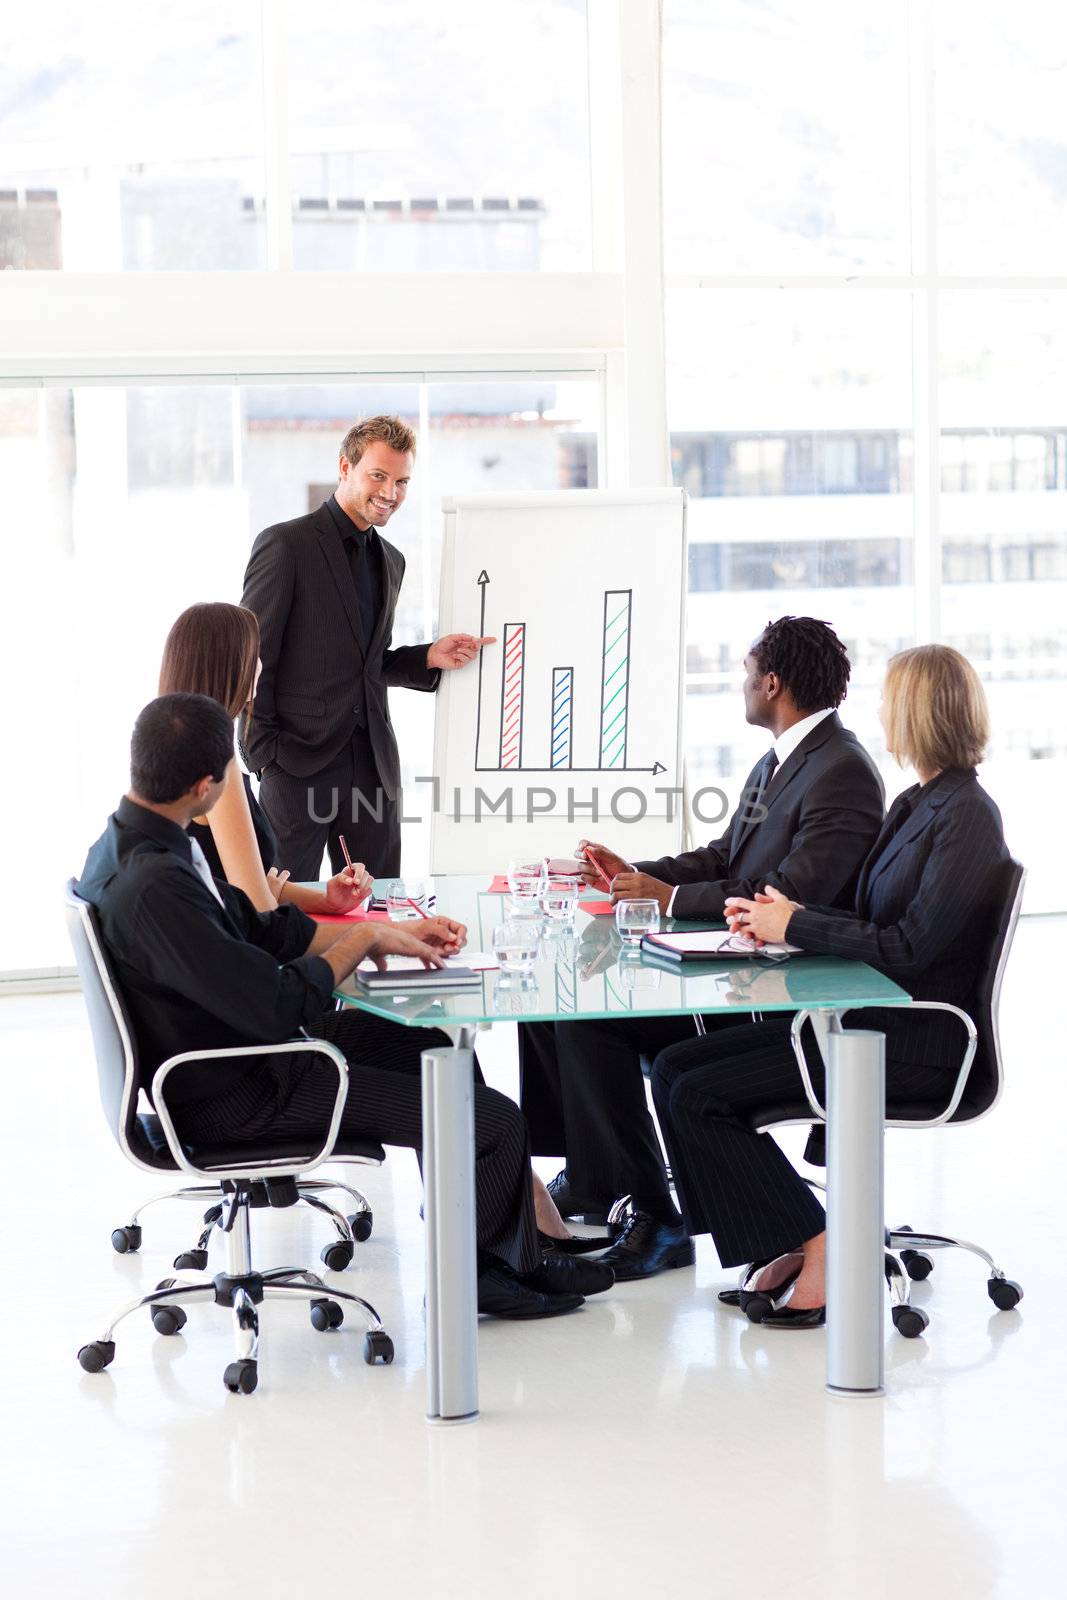 Young businessman reporting to sales to his team in an office